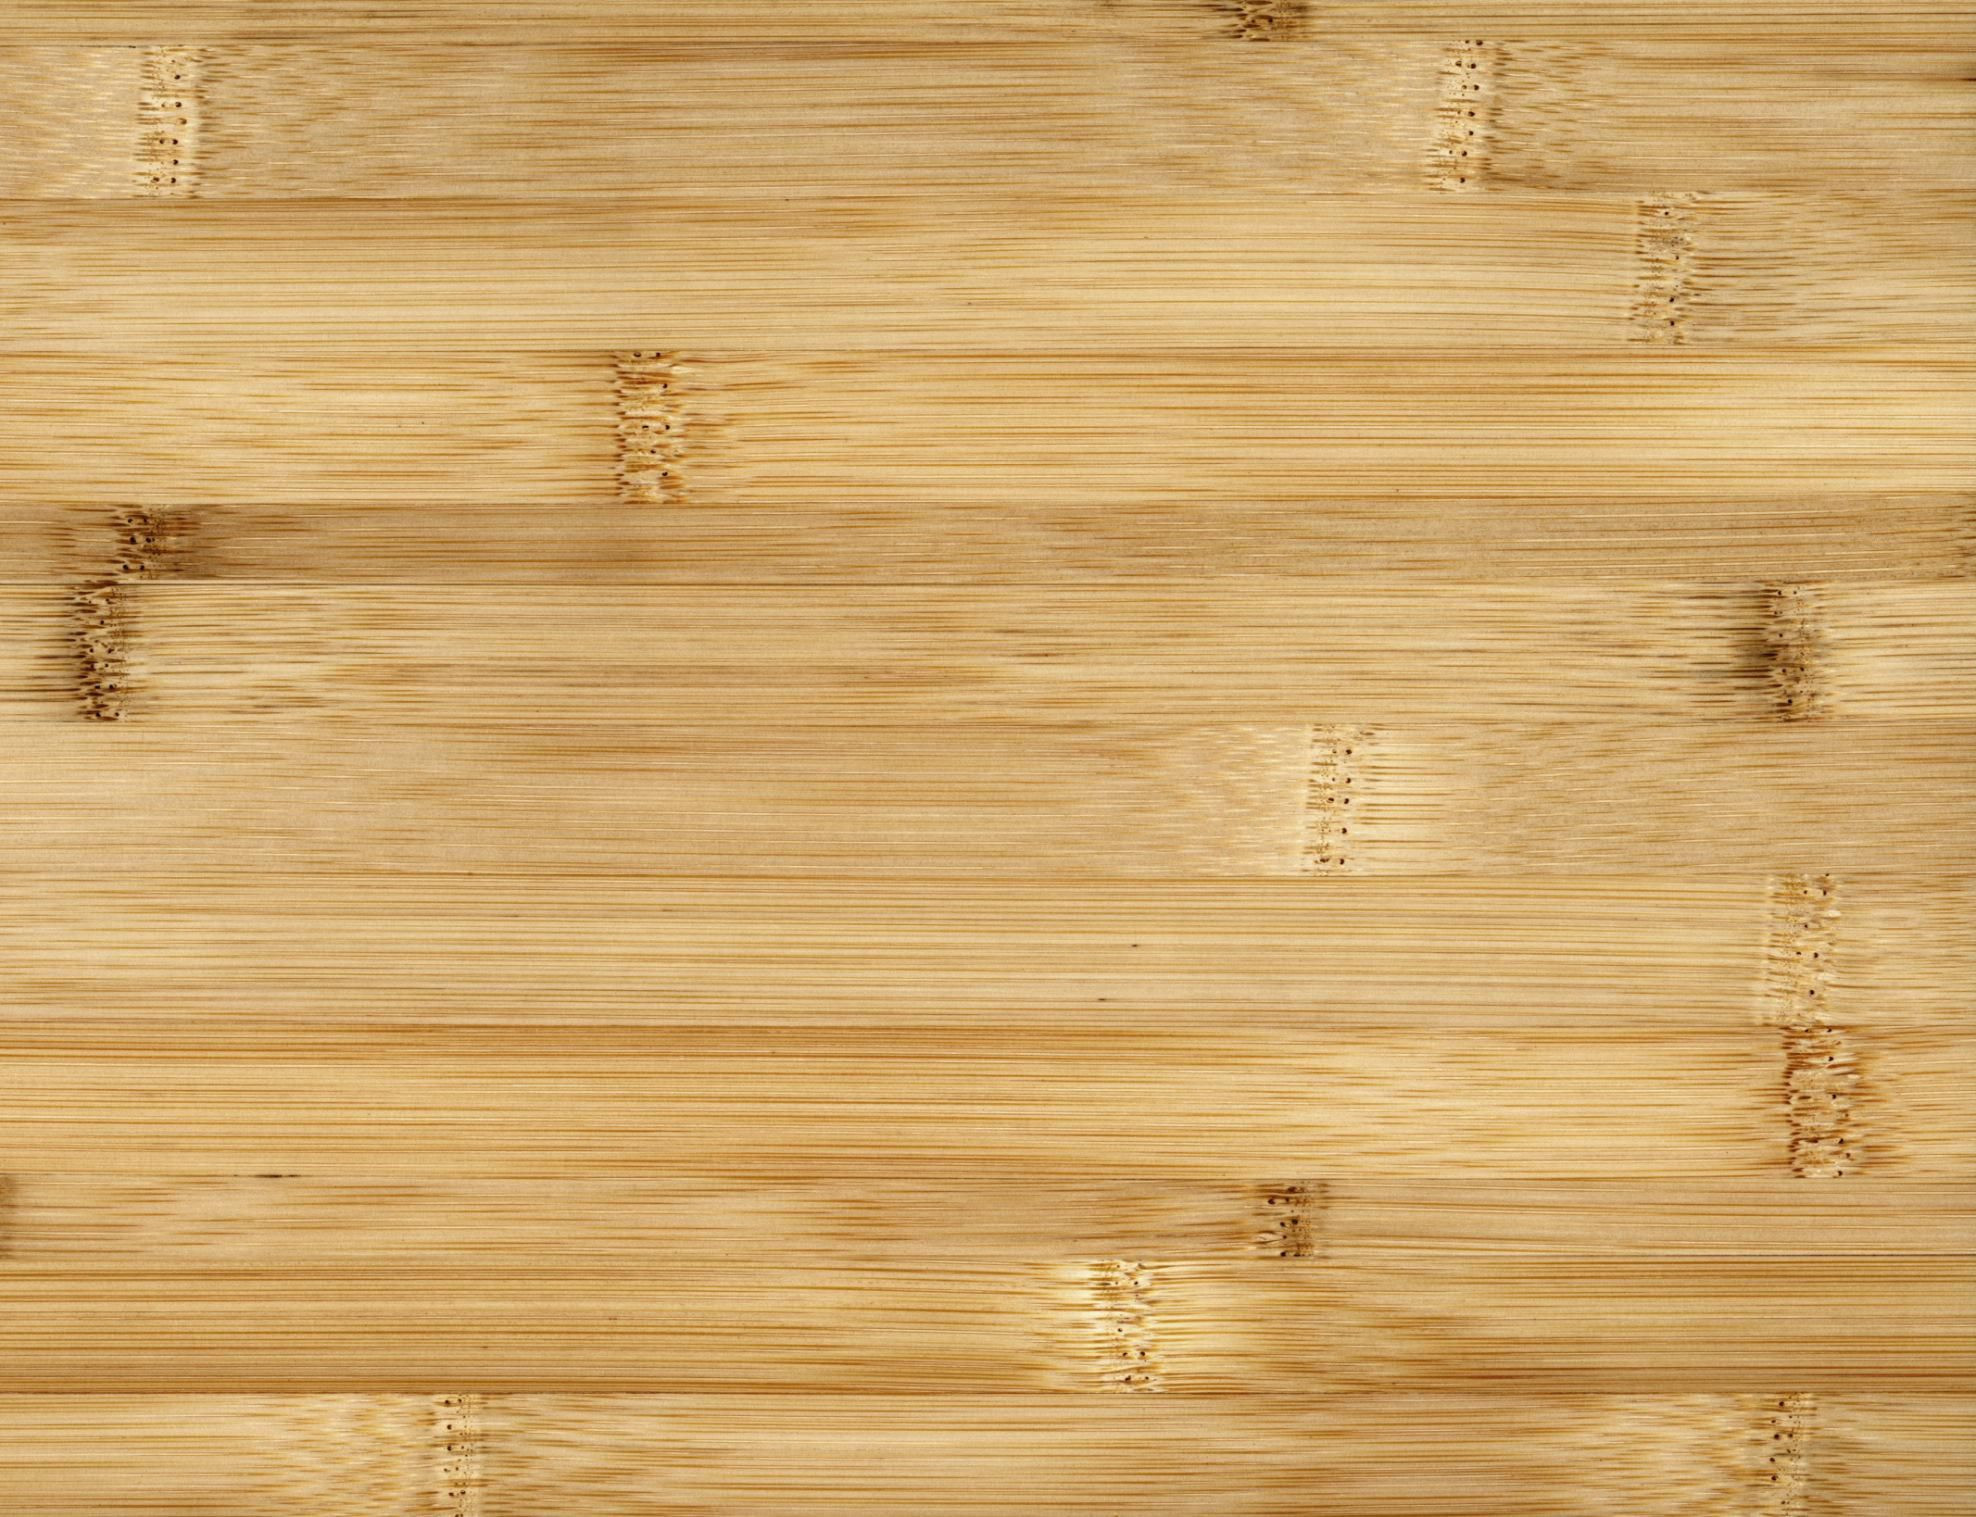 24 Unique Hardwood Floor Cleaning Pads 2023 free download hardwood floor cleaning pads of how to clean bamboo flooring in 200266305 001 56a2fd815f9b58b7d0d000cd